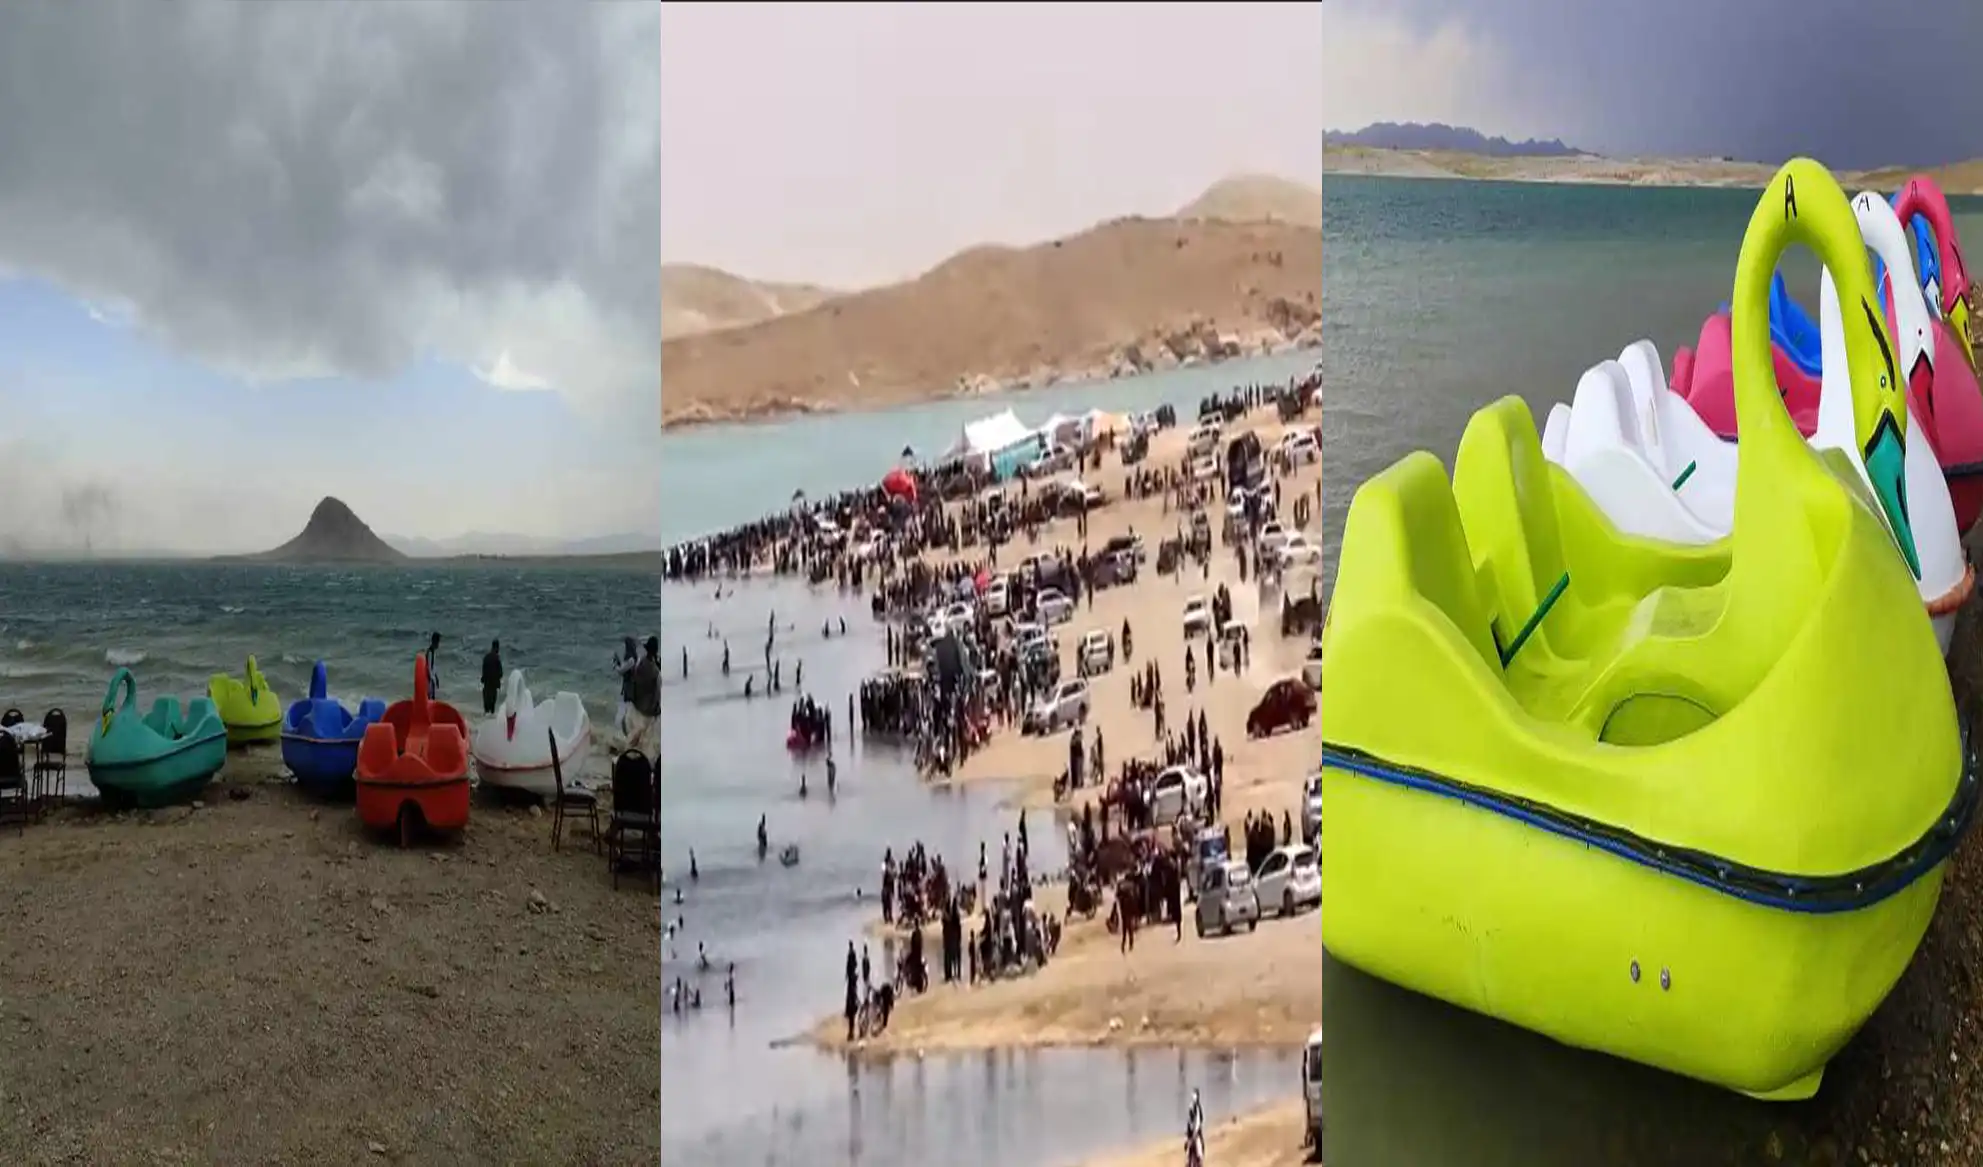 Tourists see need for rescue measures at Ghazni dams